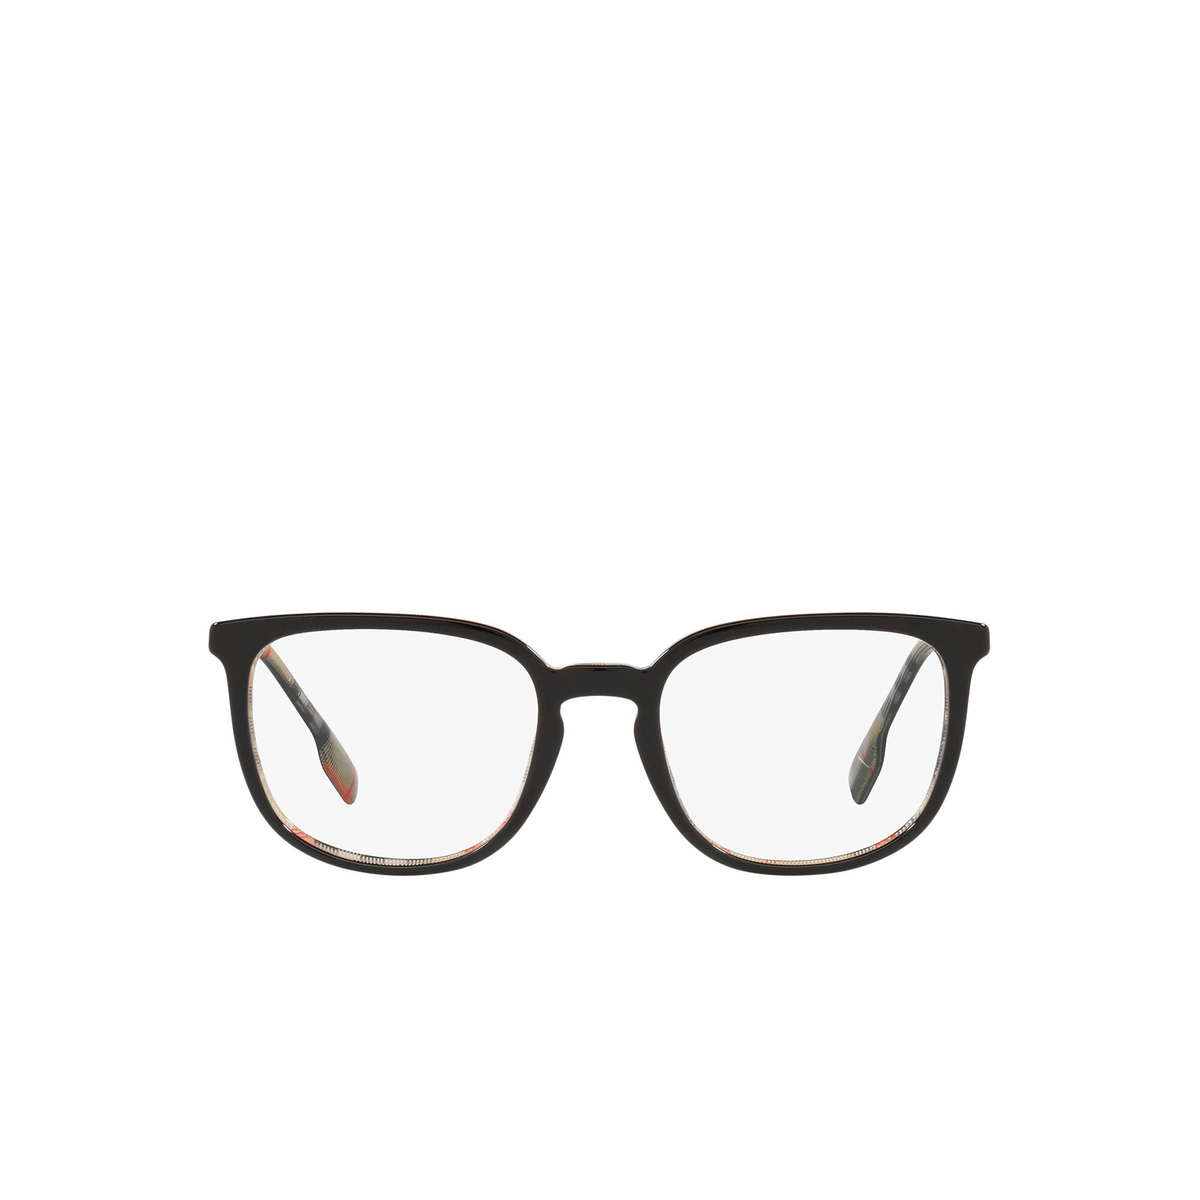 Burberry® Square Eyeglasses: Compton BE2307 color Top Black On Vintage Check 3838 - front view.